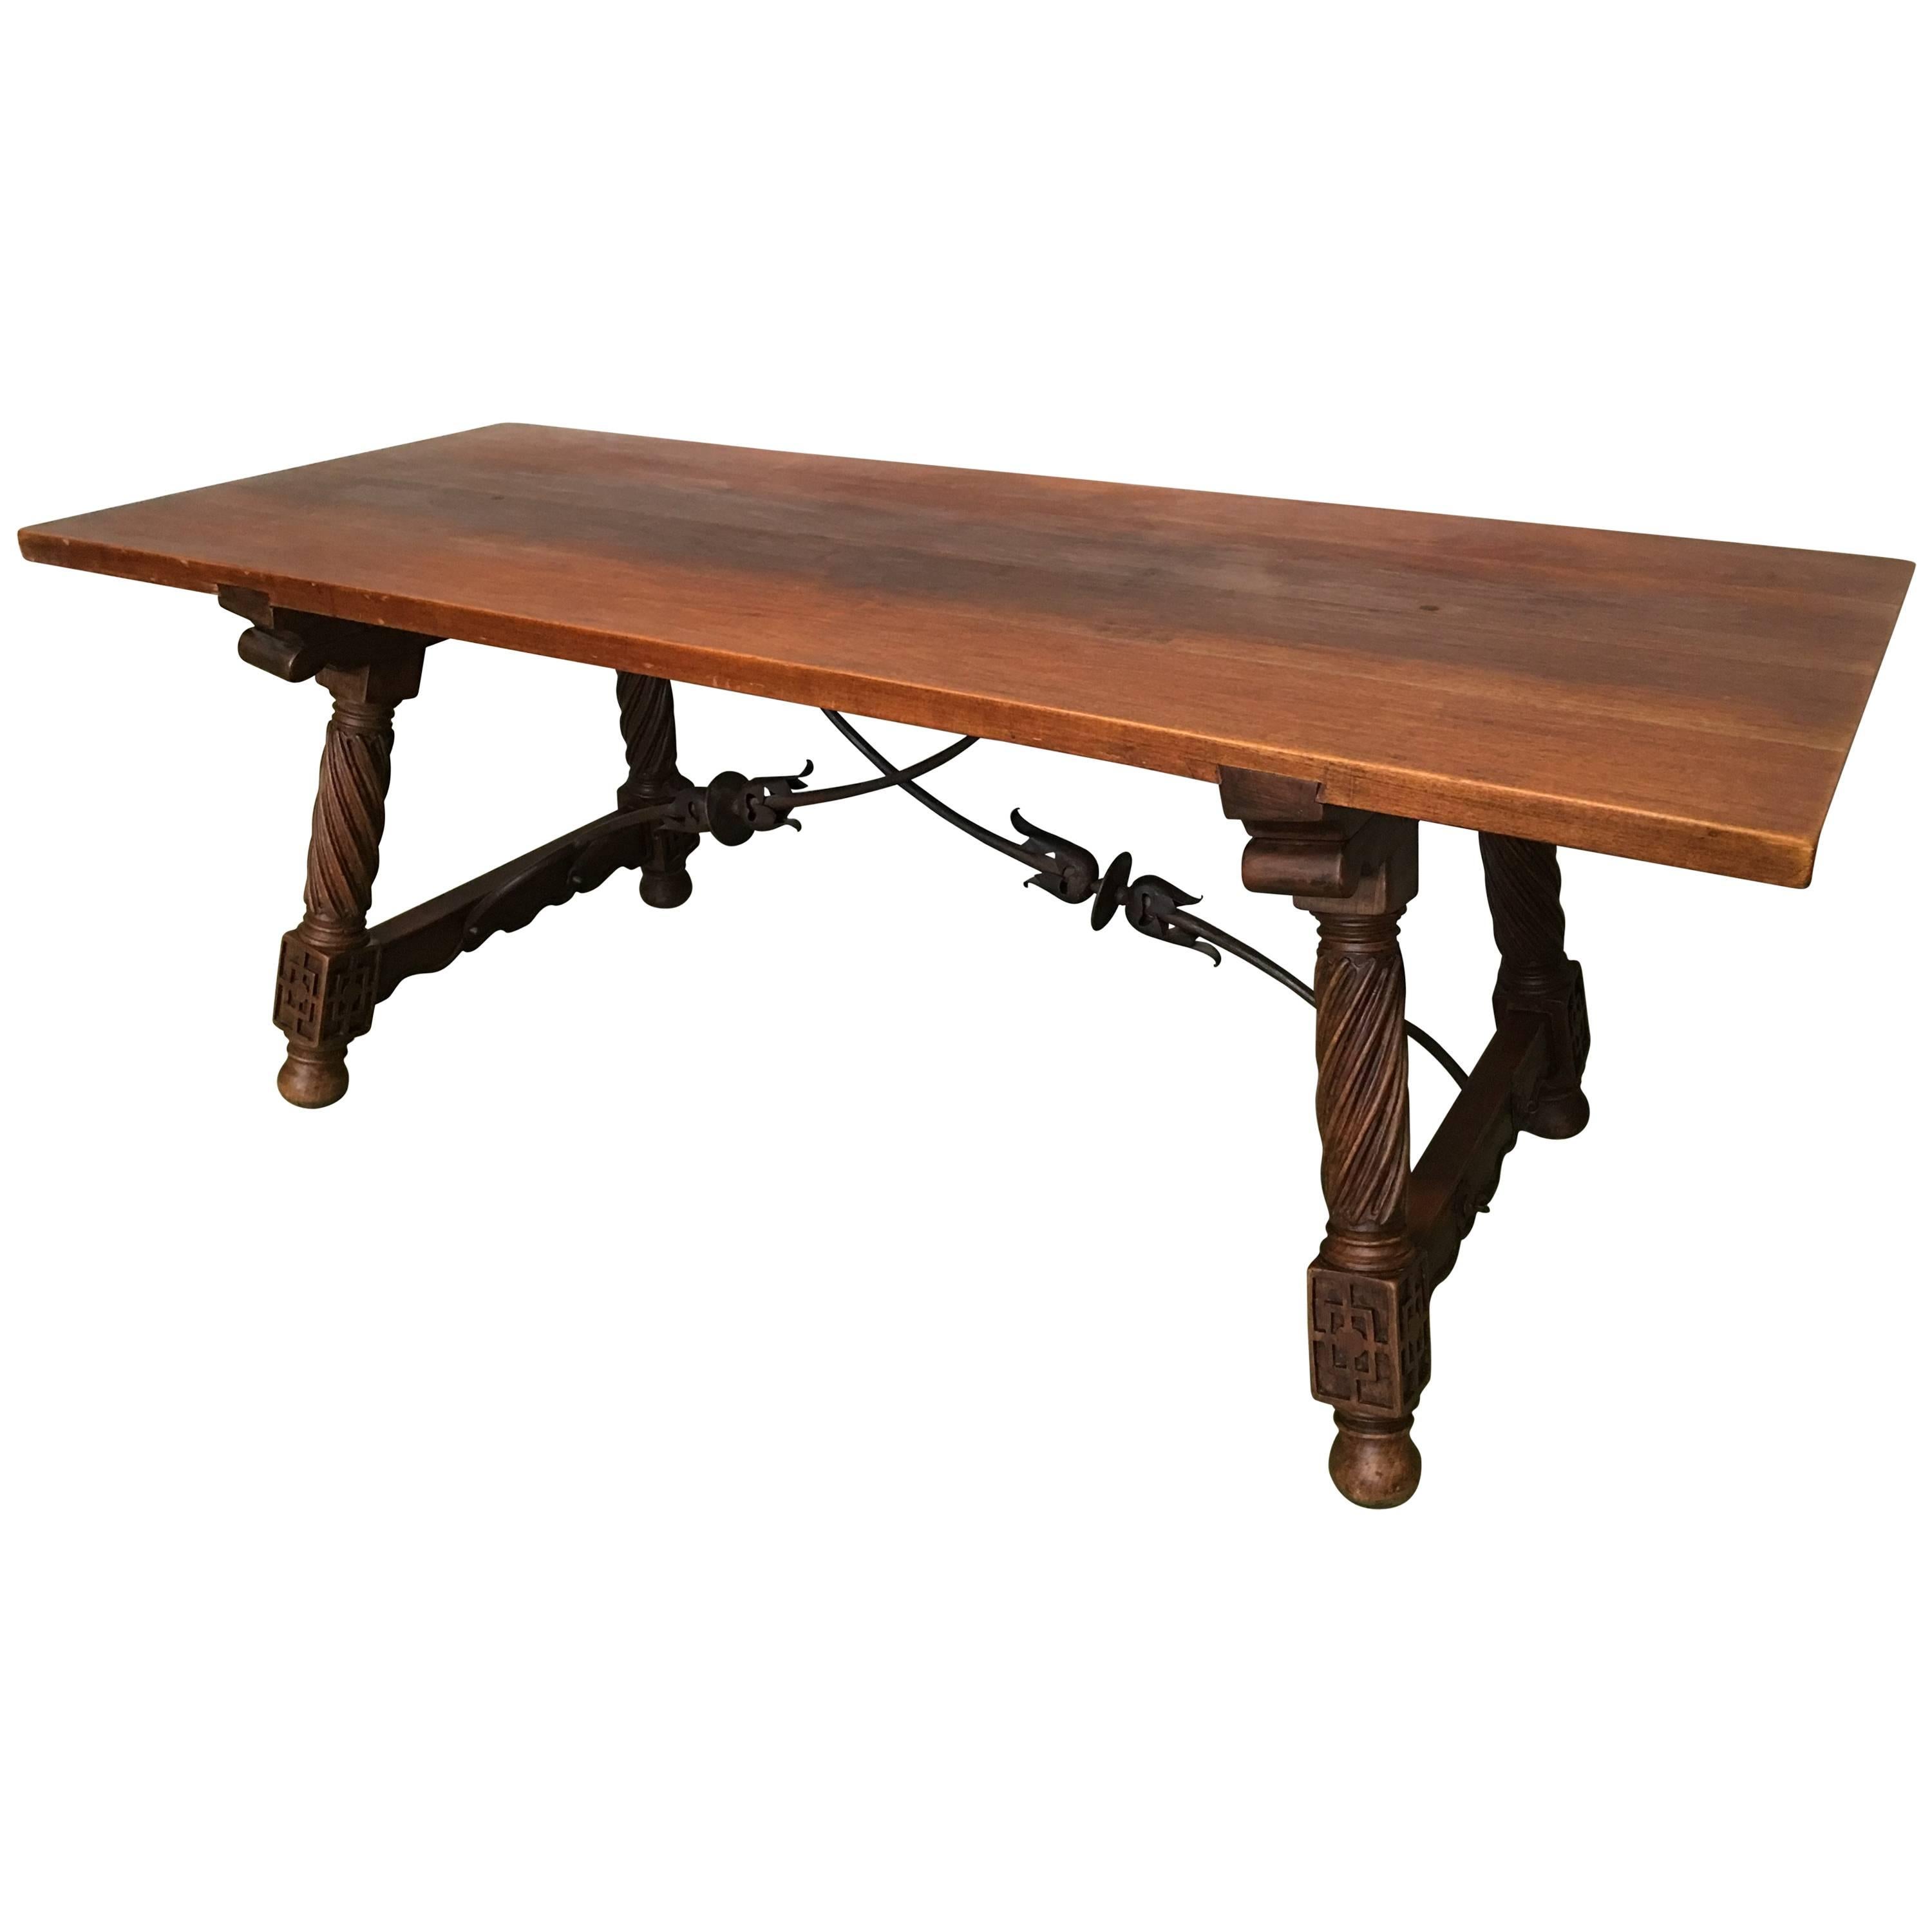 19th Spanish refectory desk table with solomonic legs and iron stretcher
Original perfect condition
Top table in perfect shape.

Perfect for a kitchen.